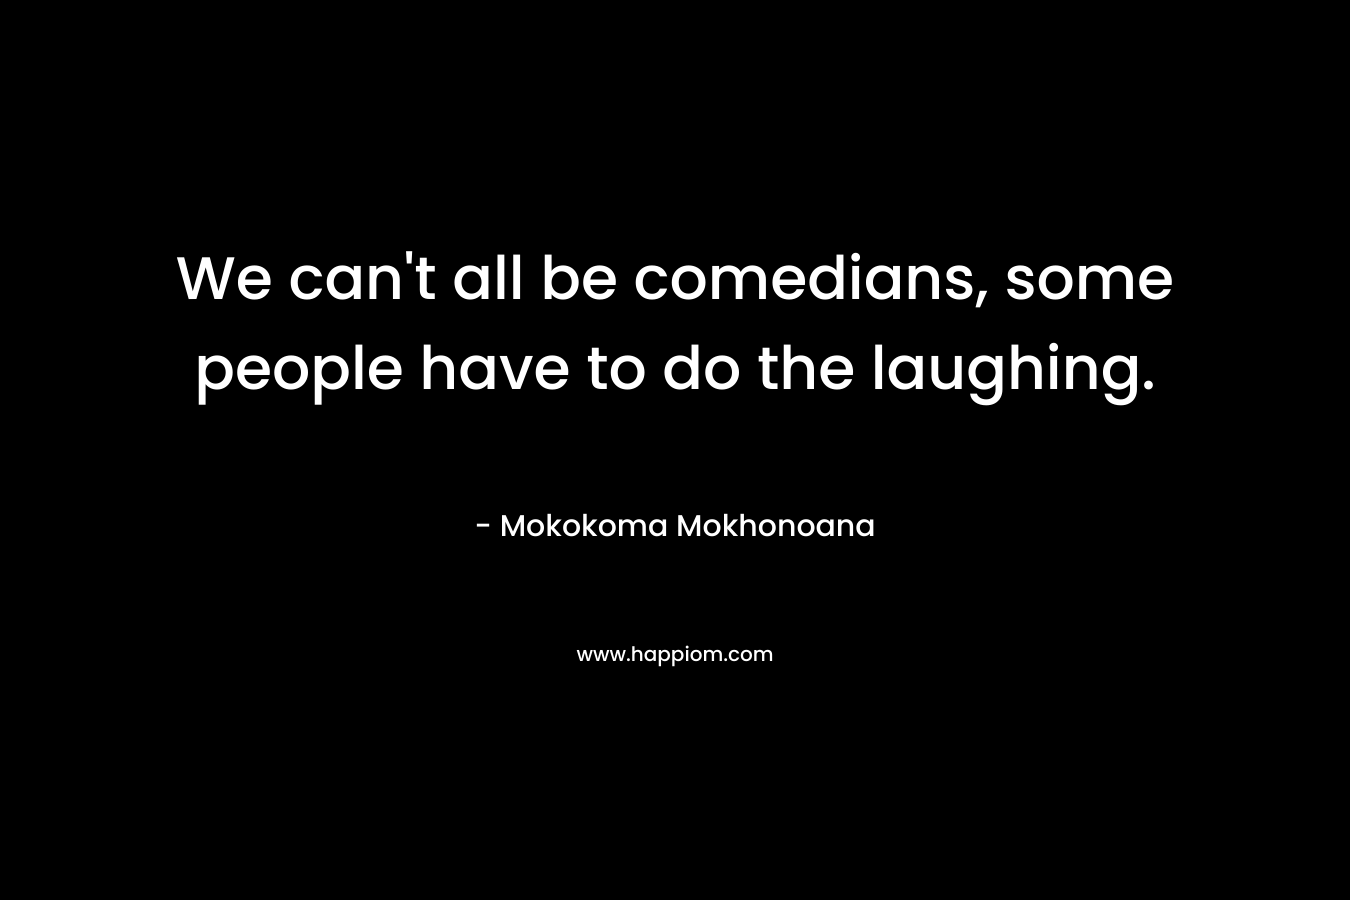 We can’t all be comedians, some people have to do the laughing. – Mokokoma Mokhonoana